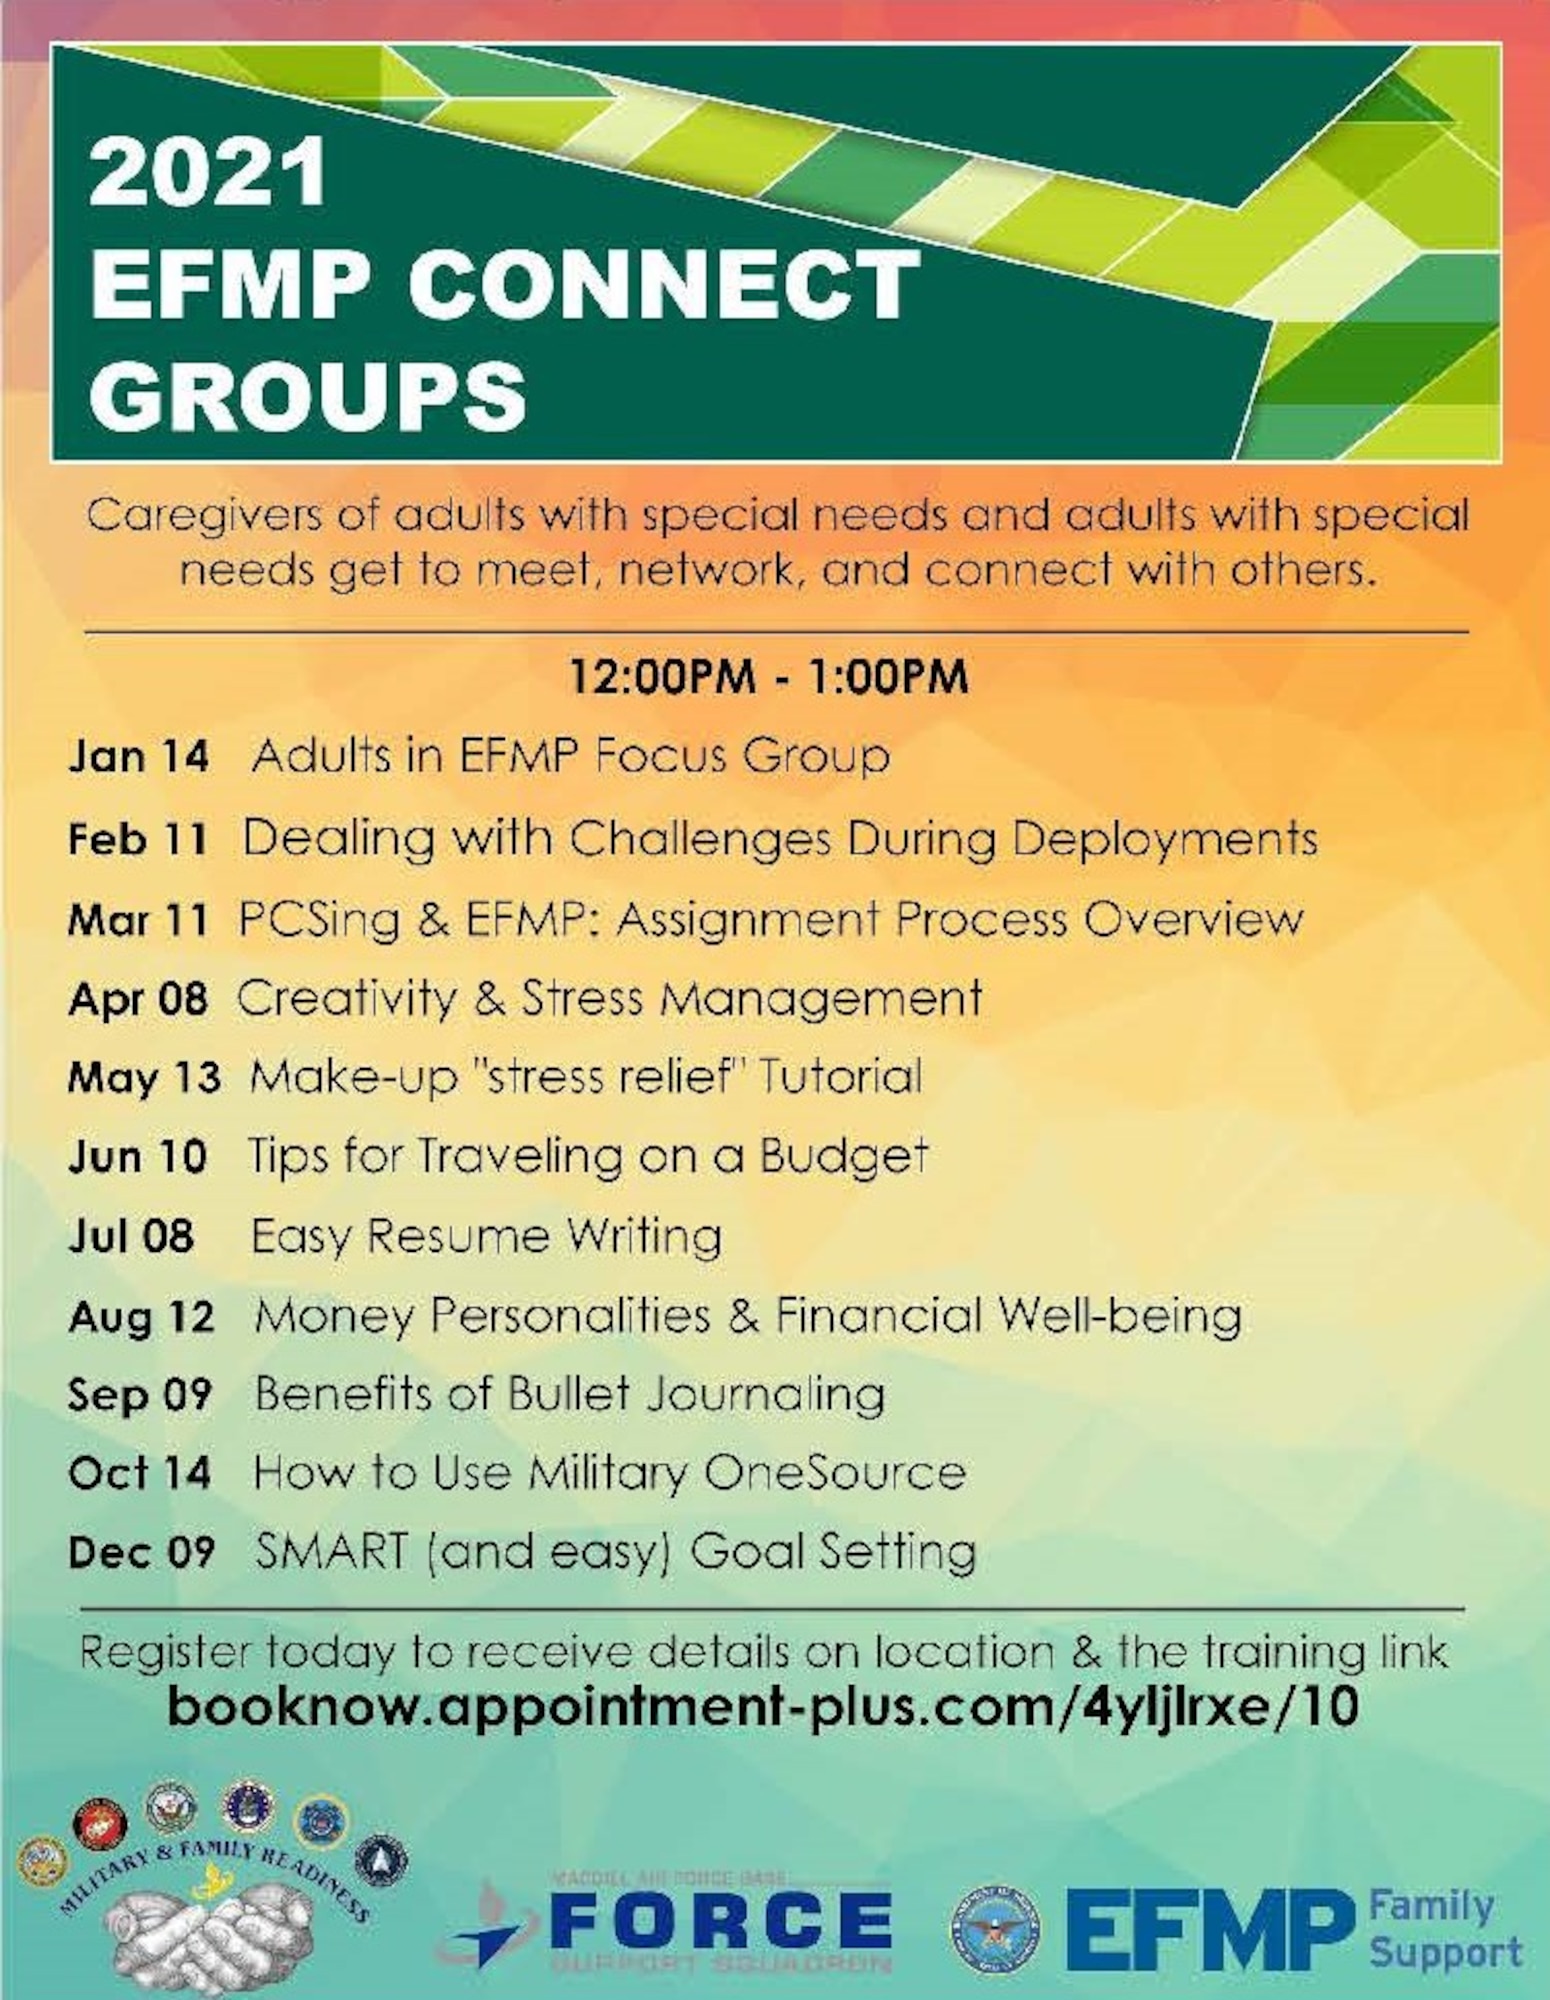 The Exceptional Family Member Program (EFMP) at MacDill Air Force Base, Fla., services more than 1,000 families.